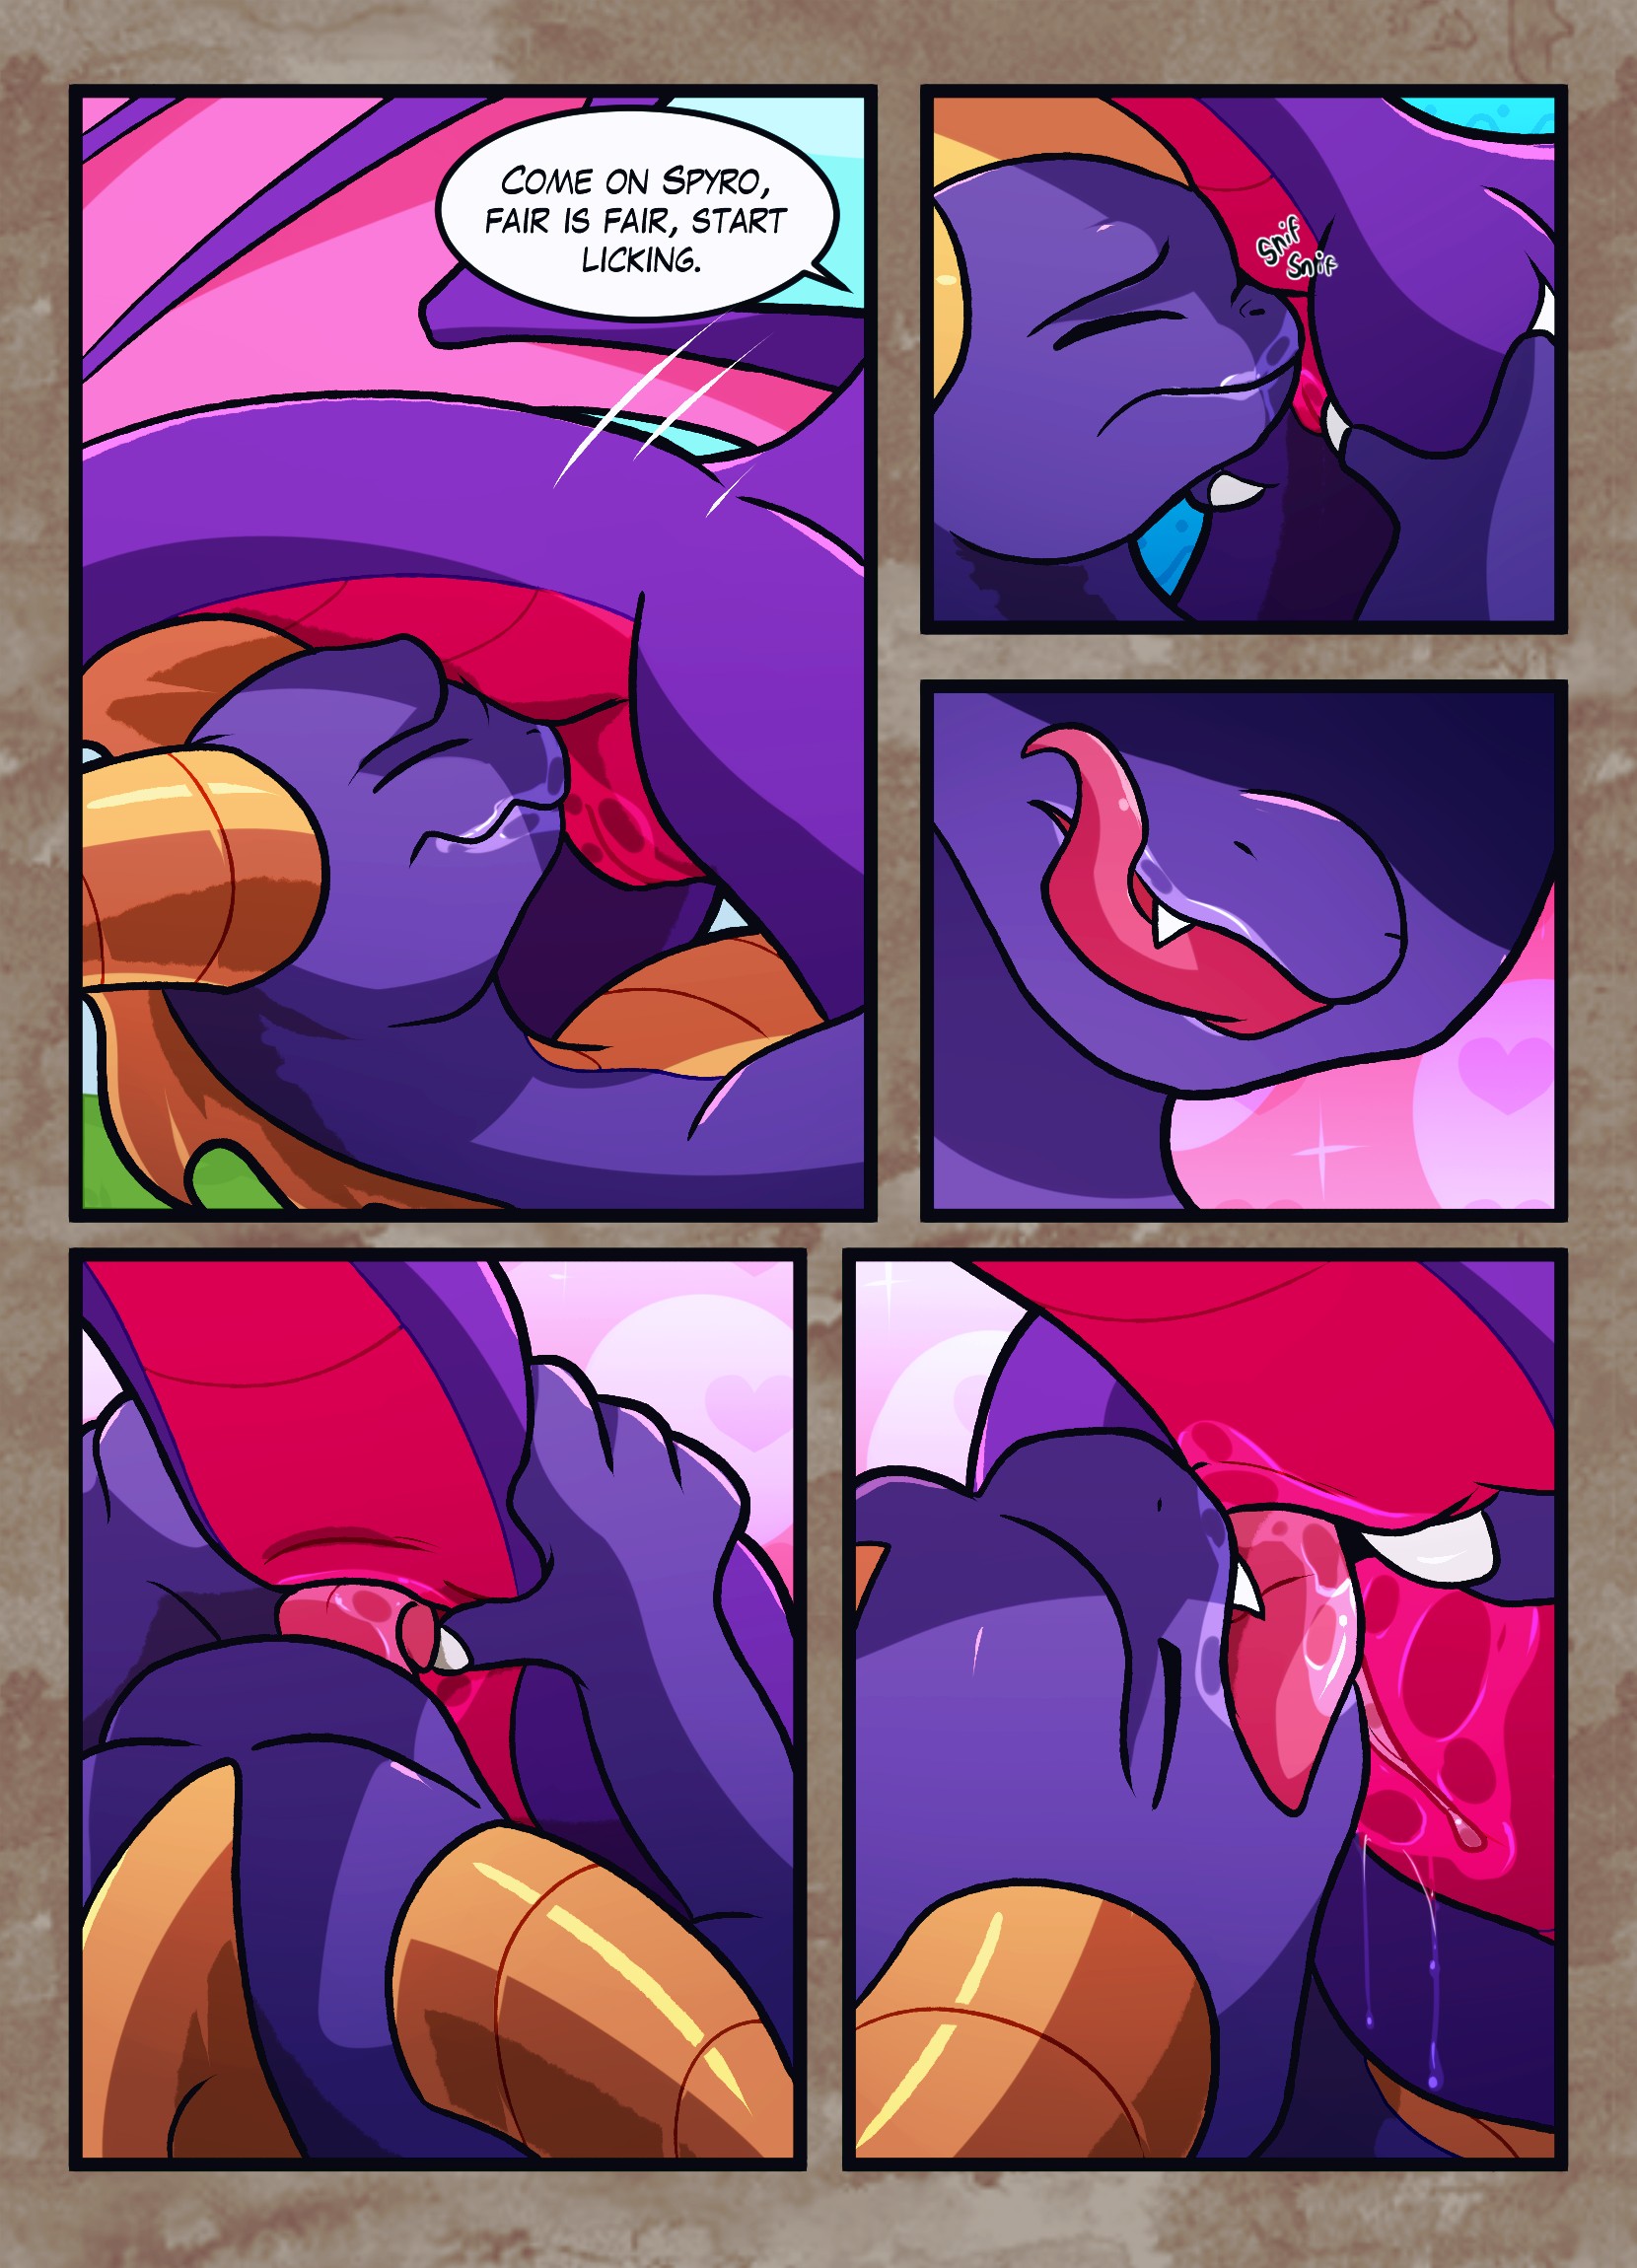 A Friend In Need porn comic page 009